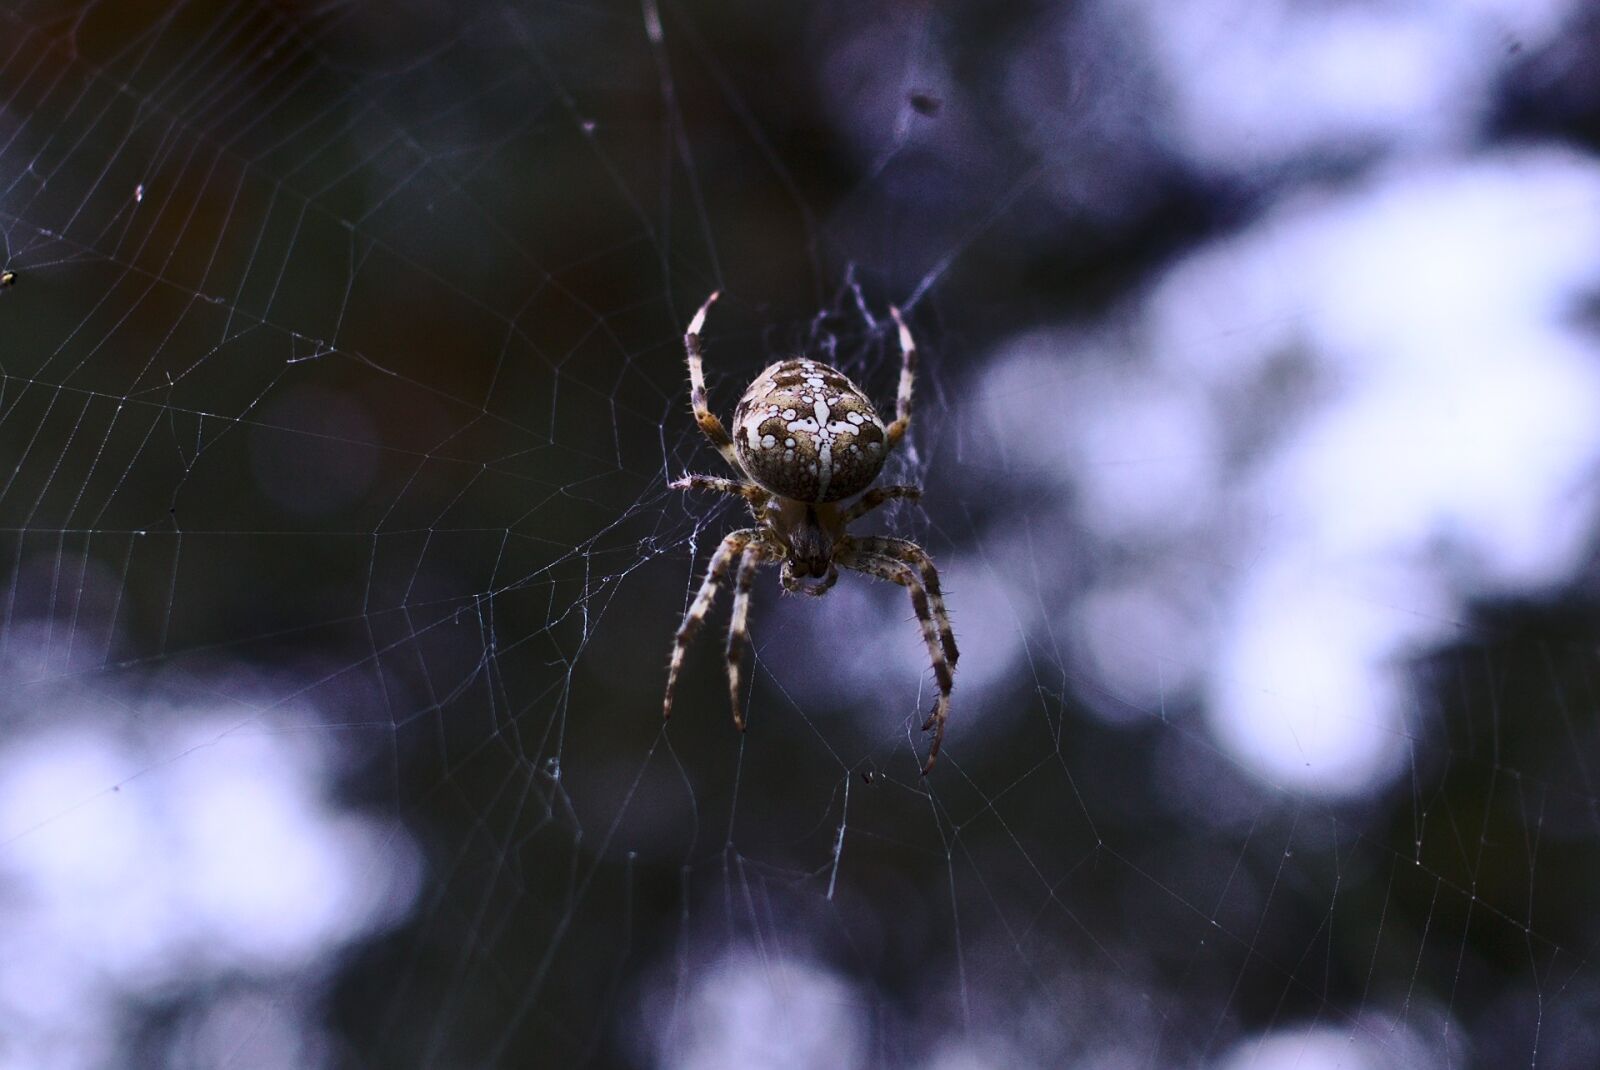 Sony a6000 sample photo. Spider, nature, wildlife photography